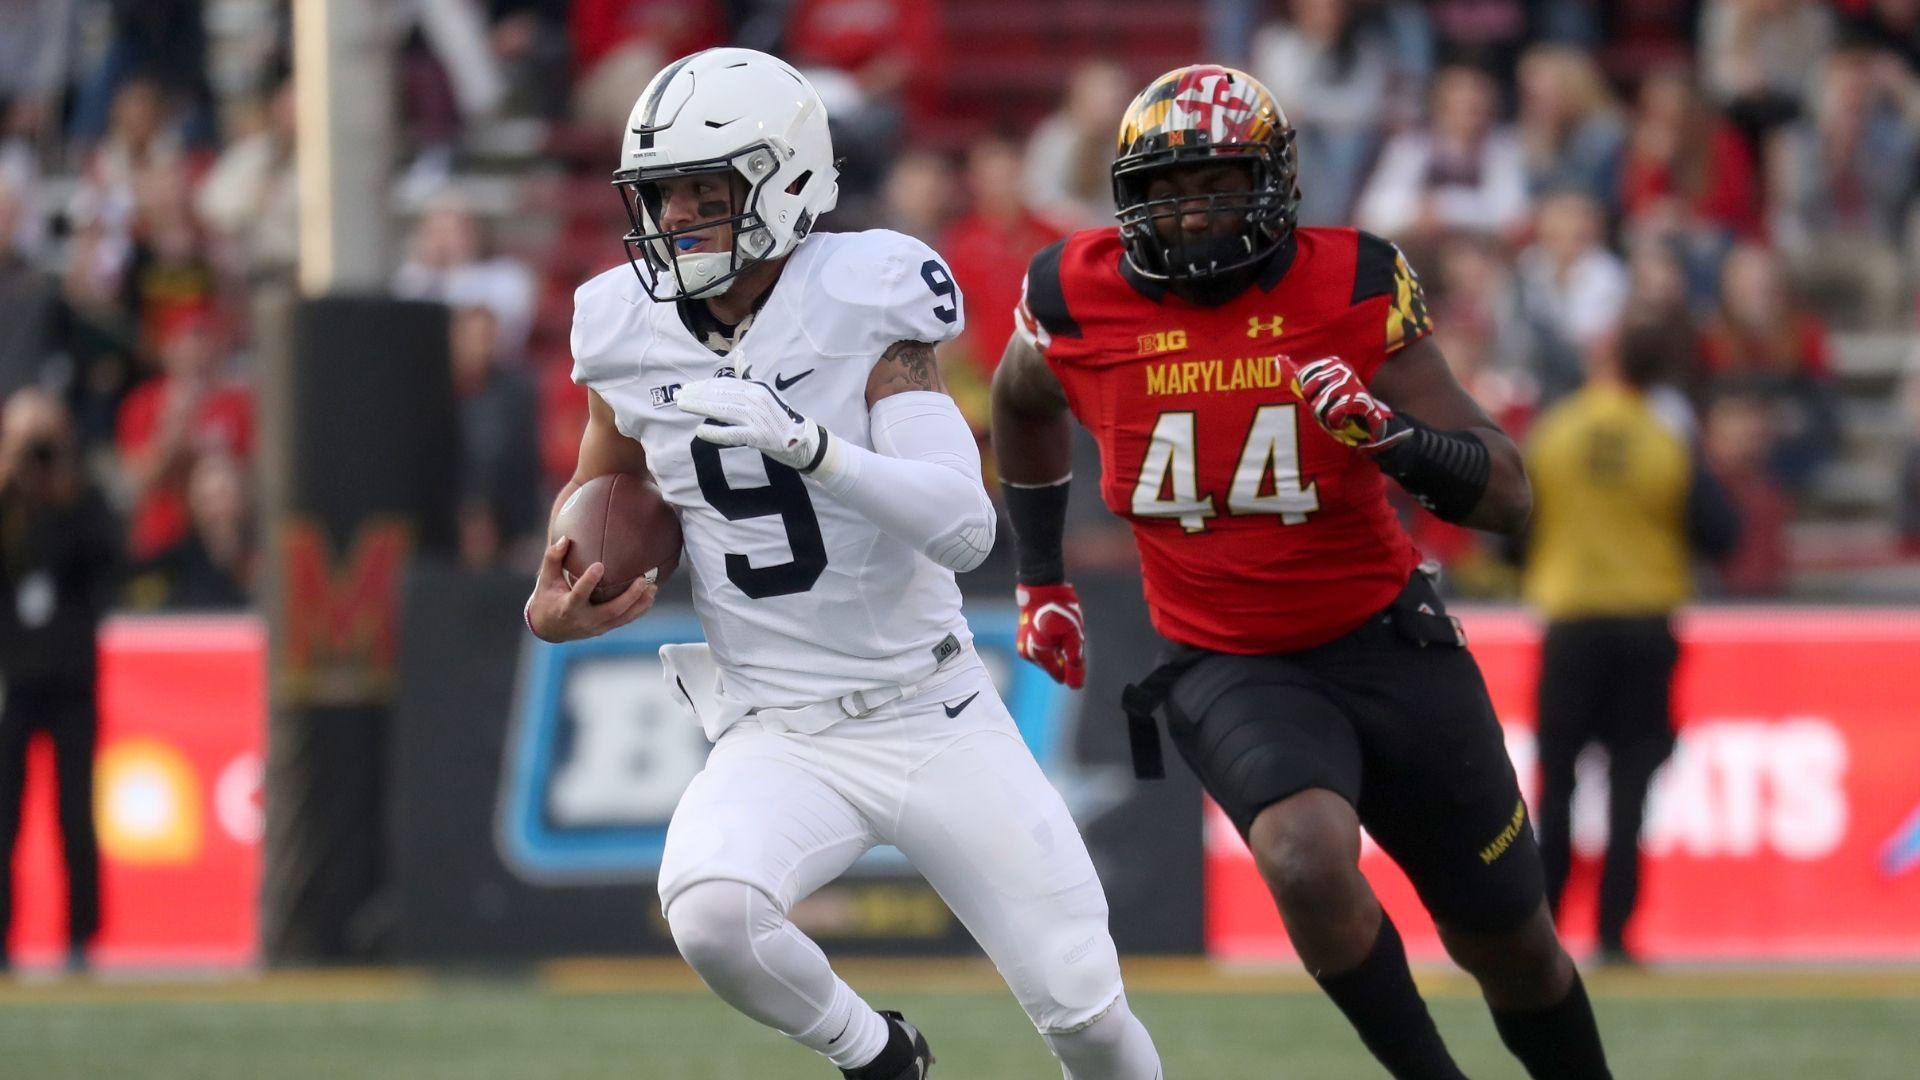 McSorley Leads No. 12 Penn State To 66 3 Rout Of Marylandabc.com